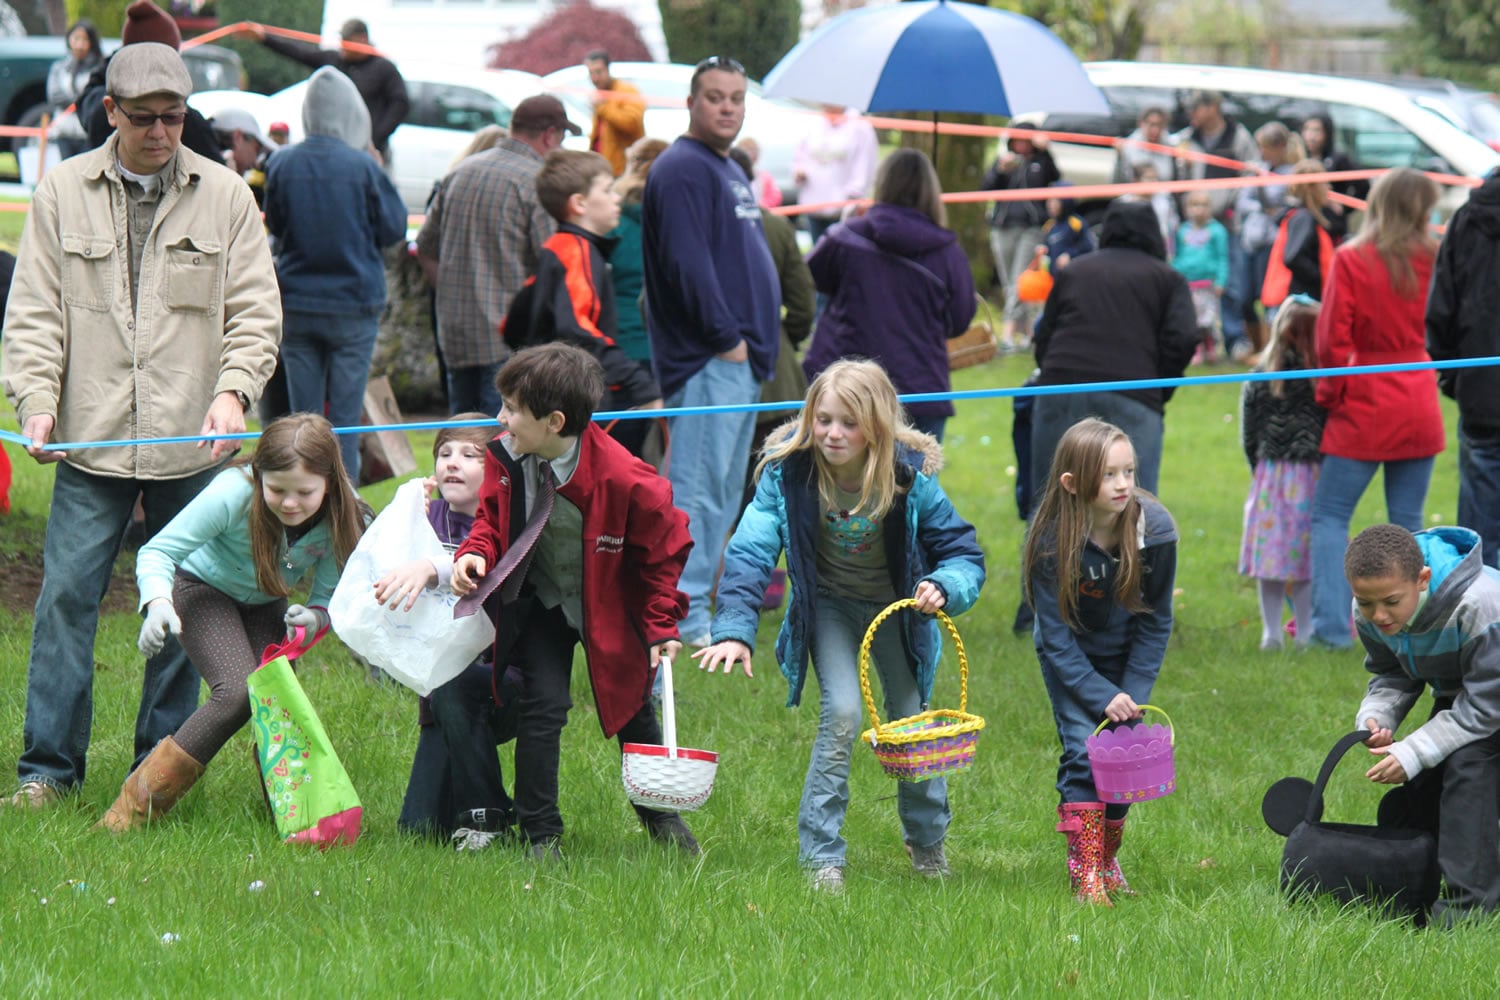 Post-Record file photo
Rain or shine, local children are once again invited to take part in the annual Easter egg hunt at Crown Park on Sunday. It is one of may special events happening this weekend.